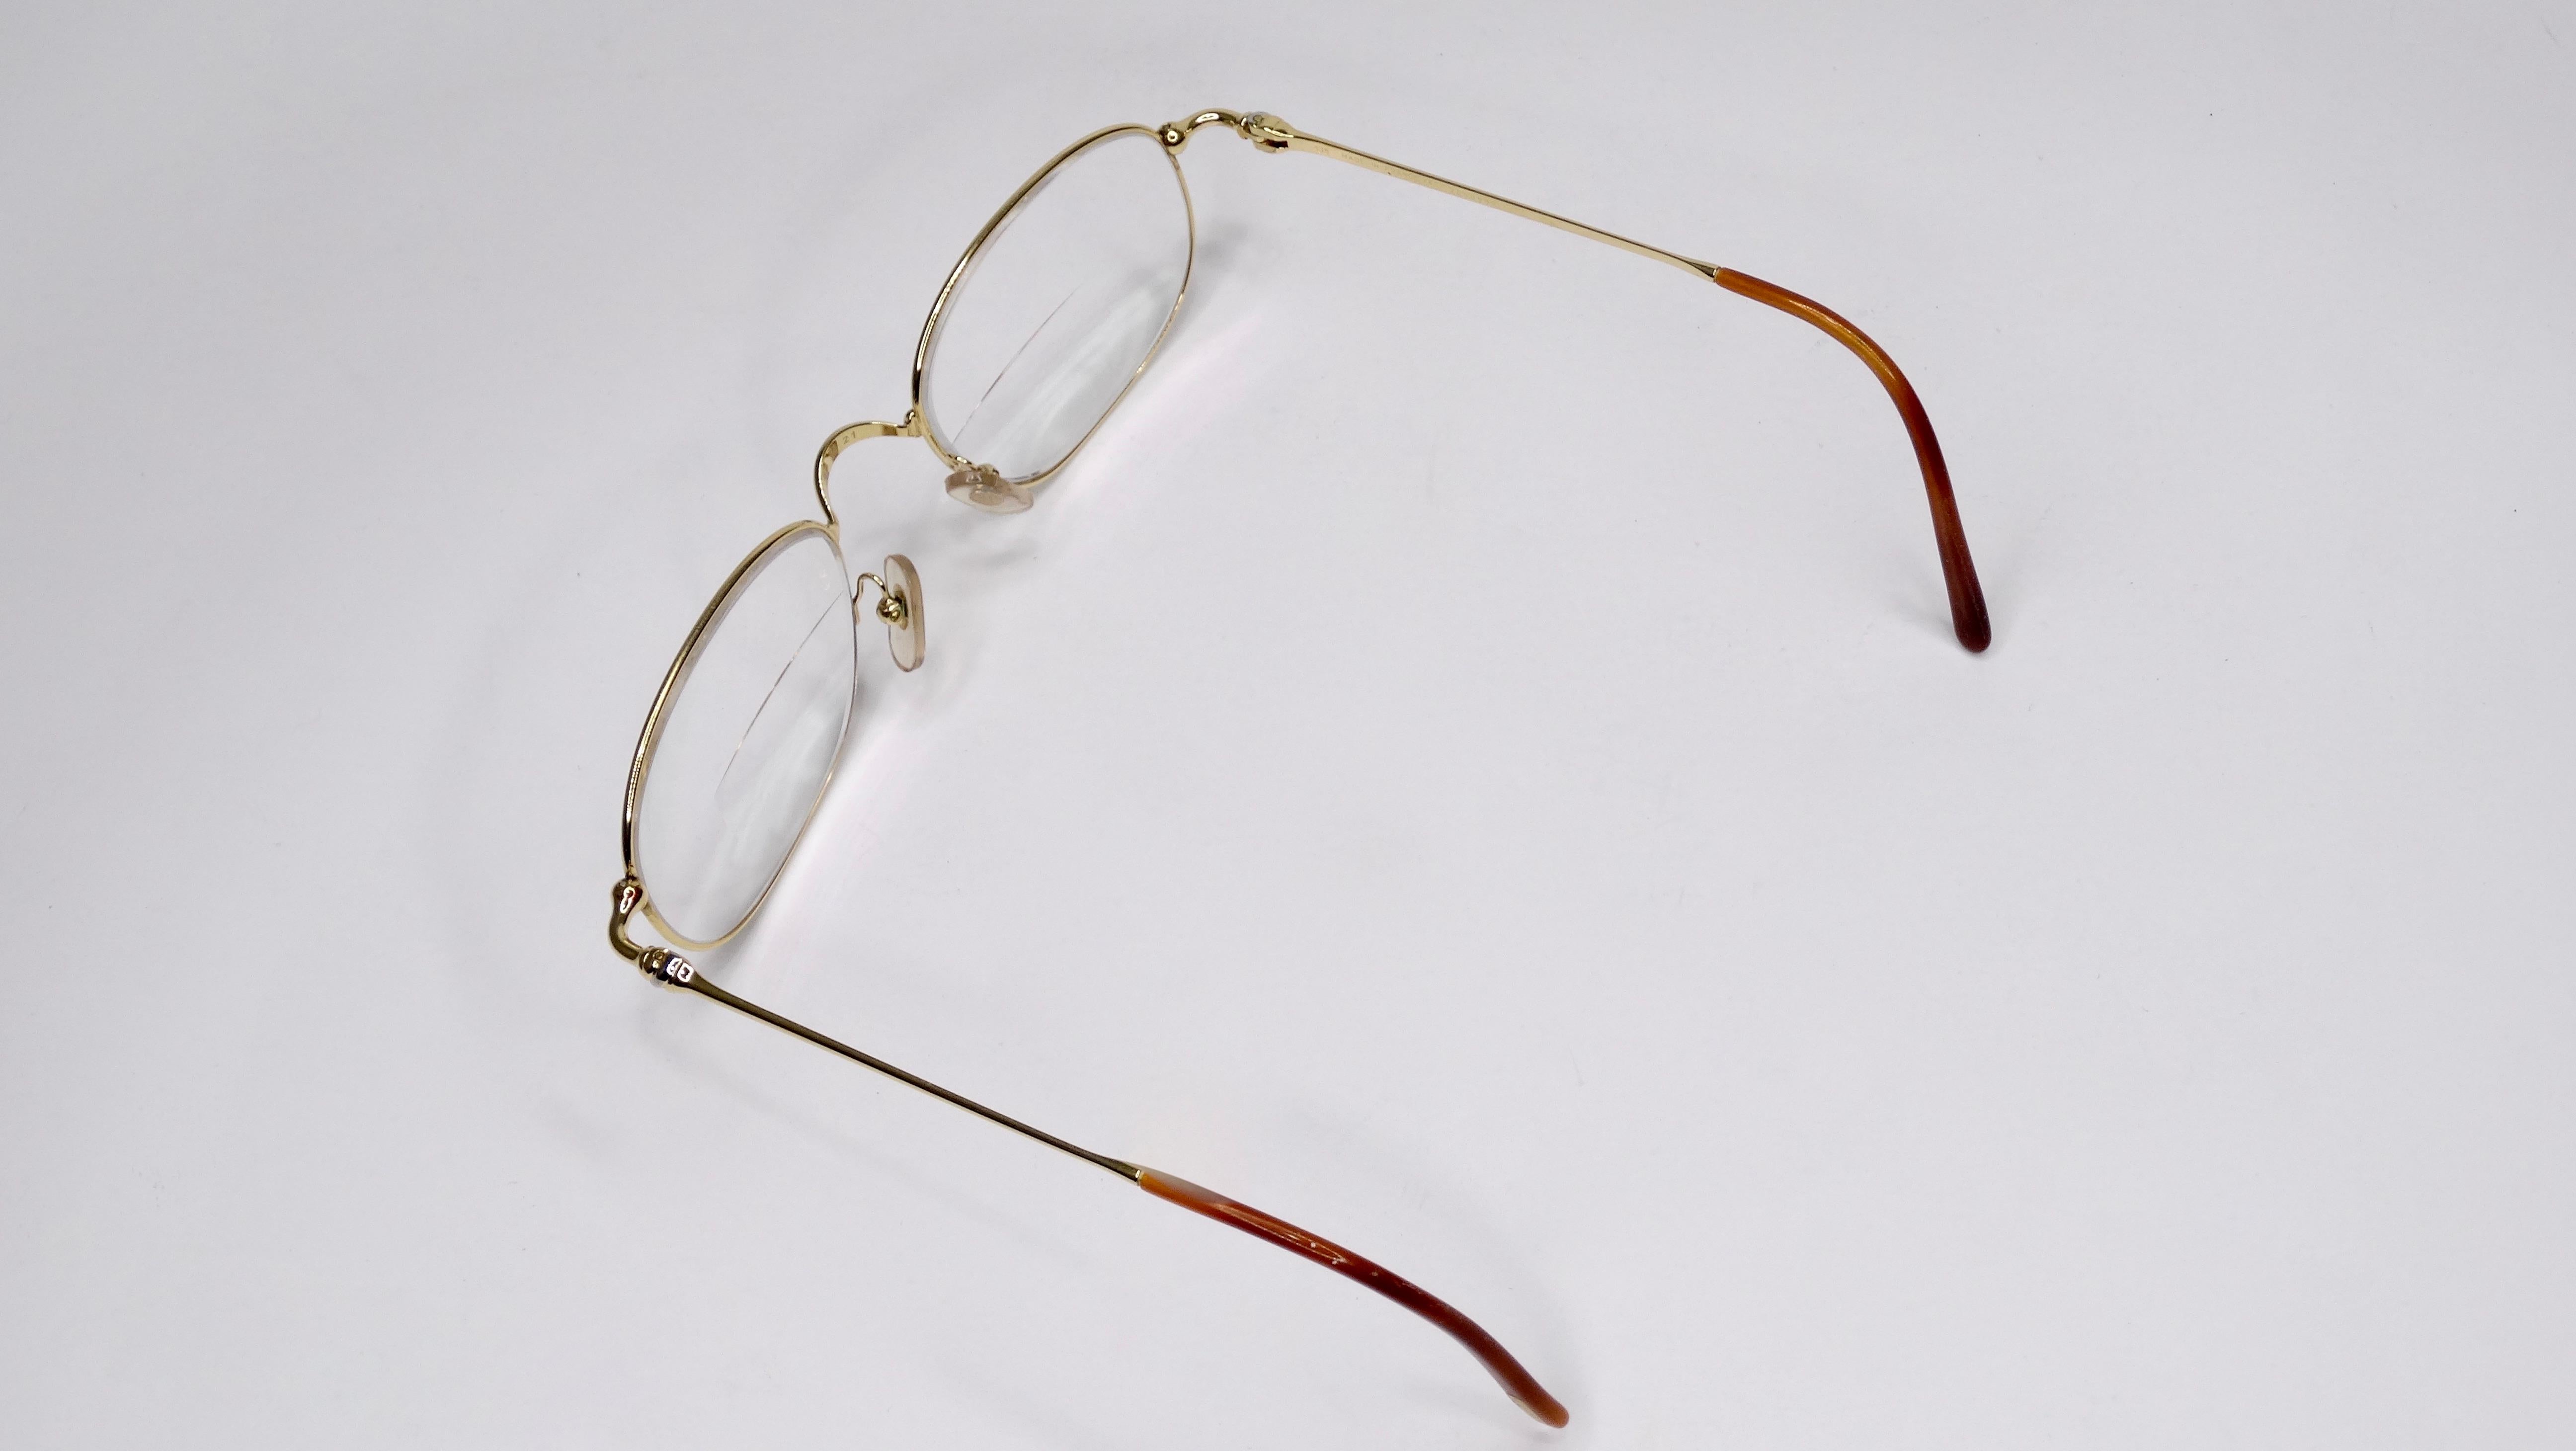 A favorite of both jewelry and fashion lovers, Cartier is always a classic! Circa 1980s, these glasses feature a two-tone silver and 18k gold plated frame with a knotted design on the arms. The lenses in these glasses are prescription/bifocal and